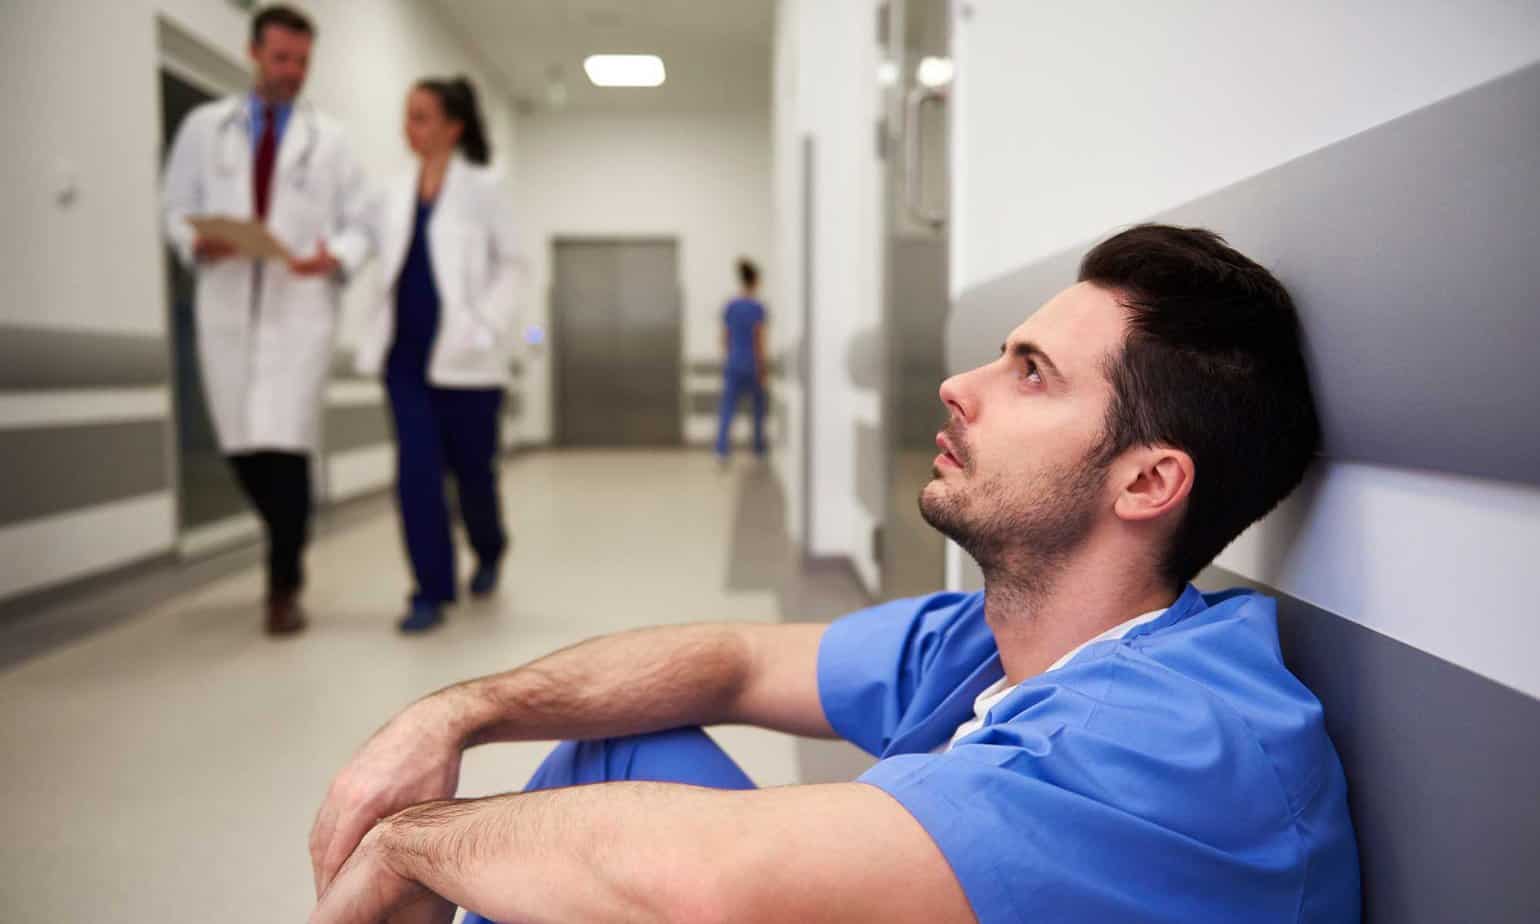 Healthcare Workers Are Battling Two Crises: COVID-19 and Mental Health Woes